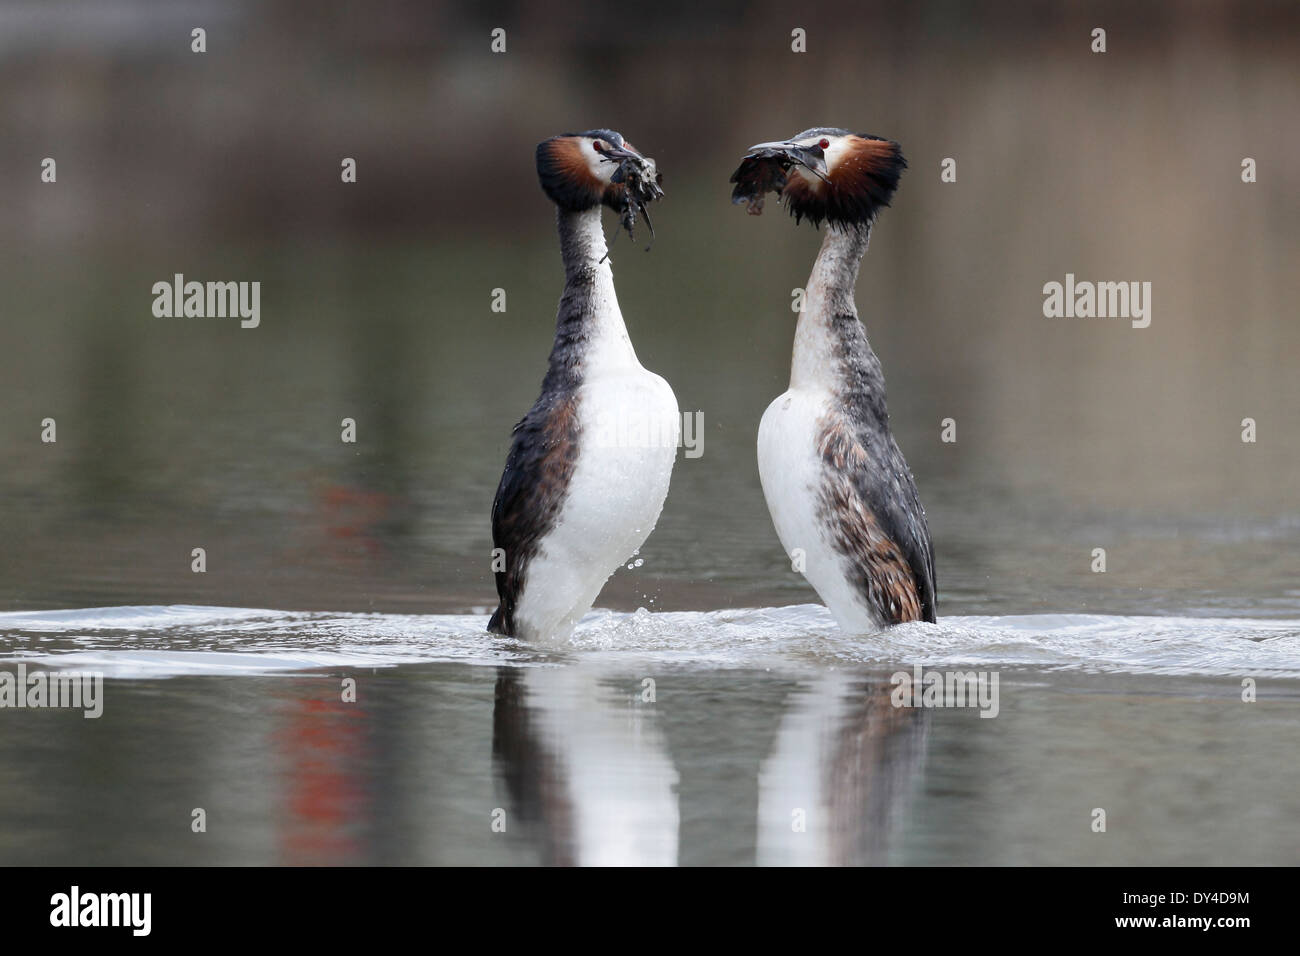 Great-crested grebe, Podiceps cristatus, two birds weed dance, Shropshire, March 2014 Stock Photo